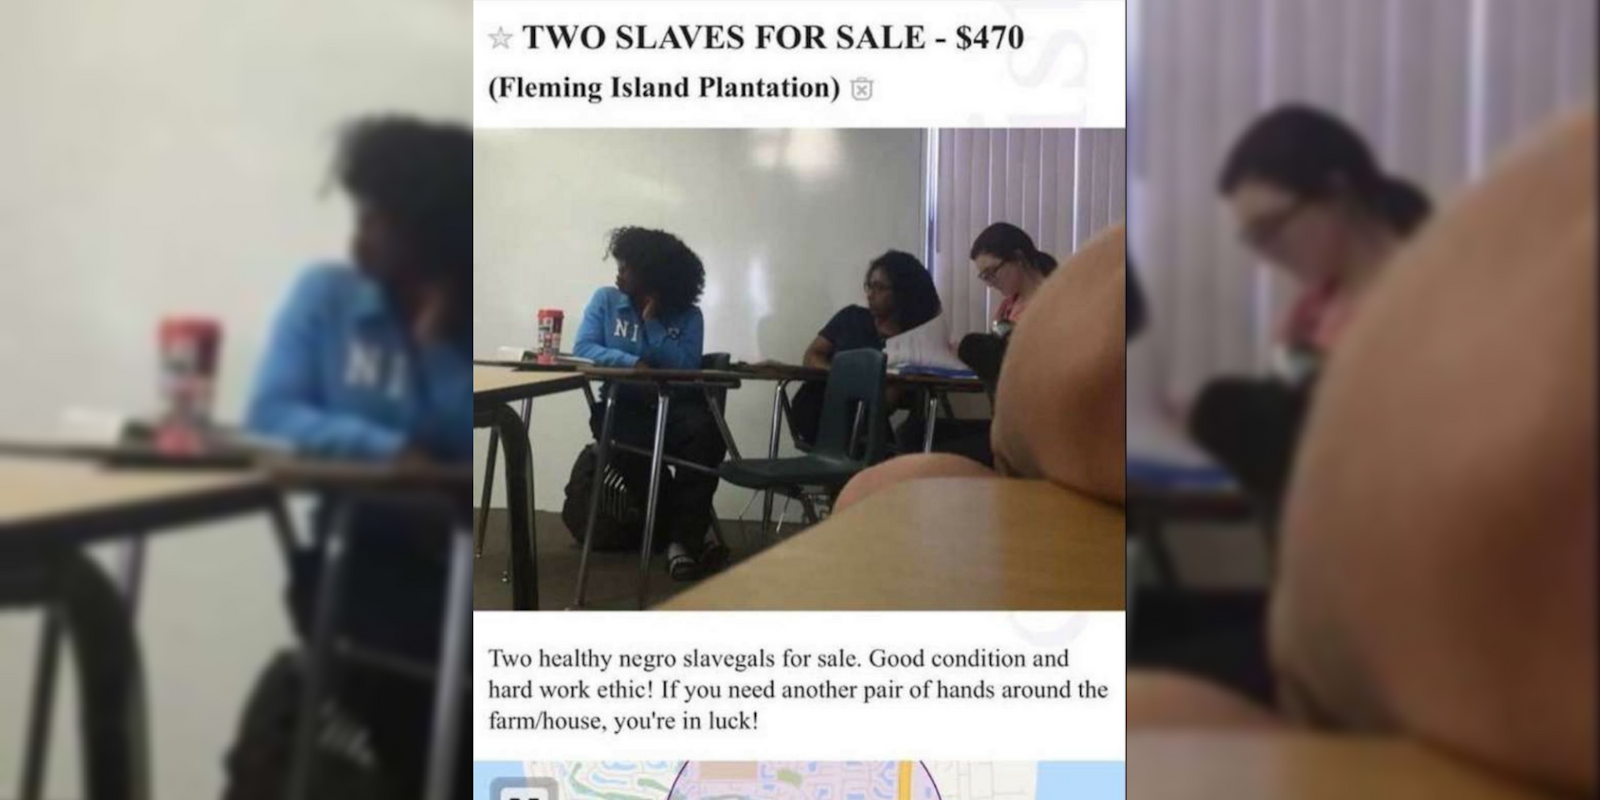 A racist craigslist ad posted by a student from Florida.